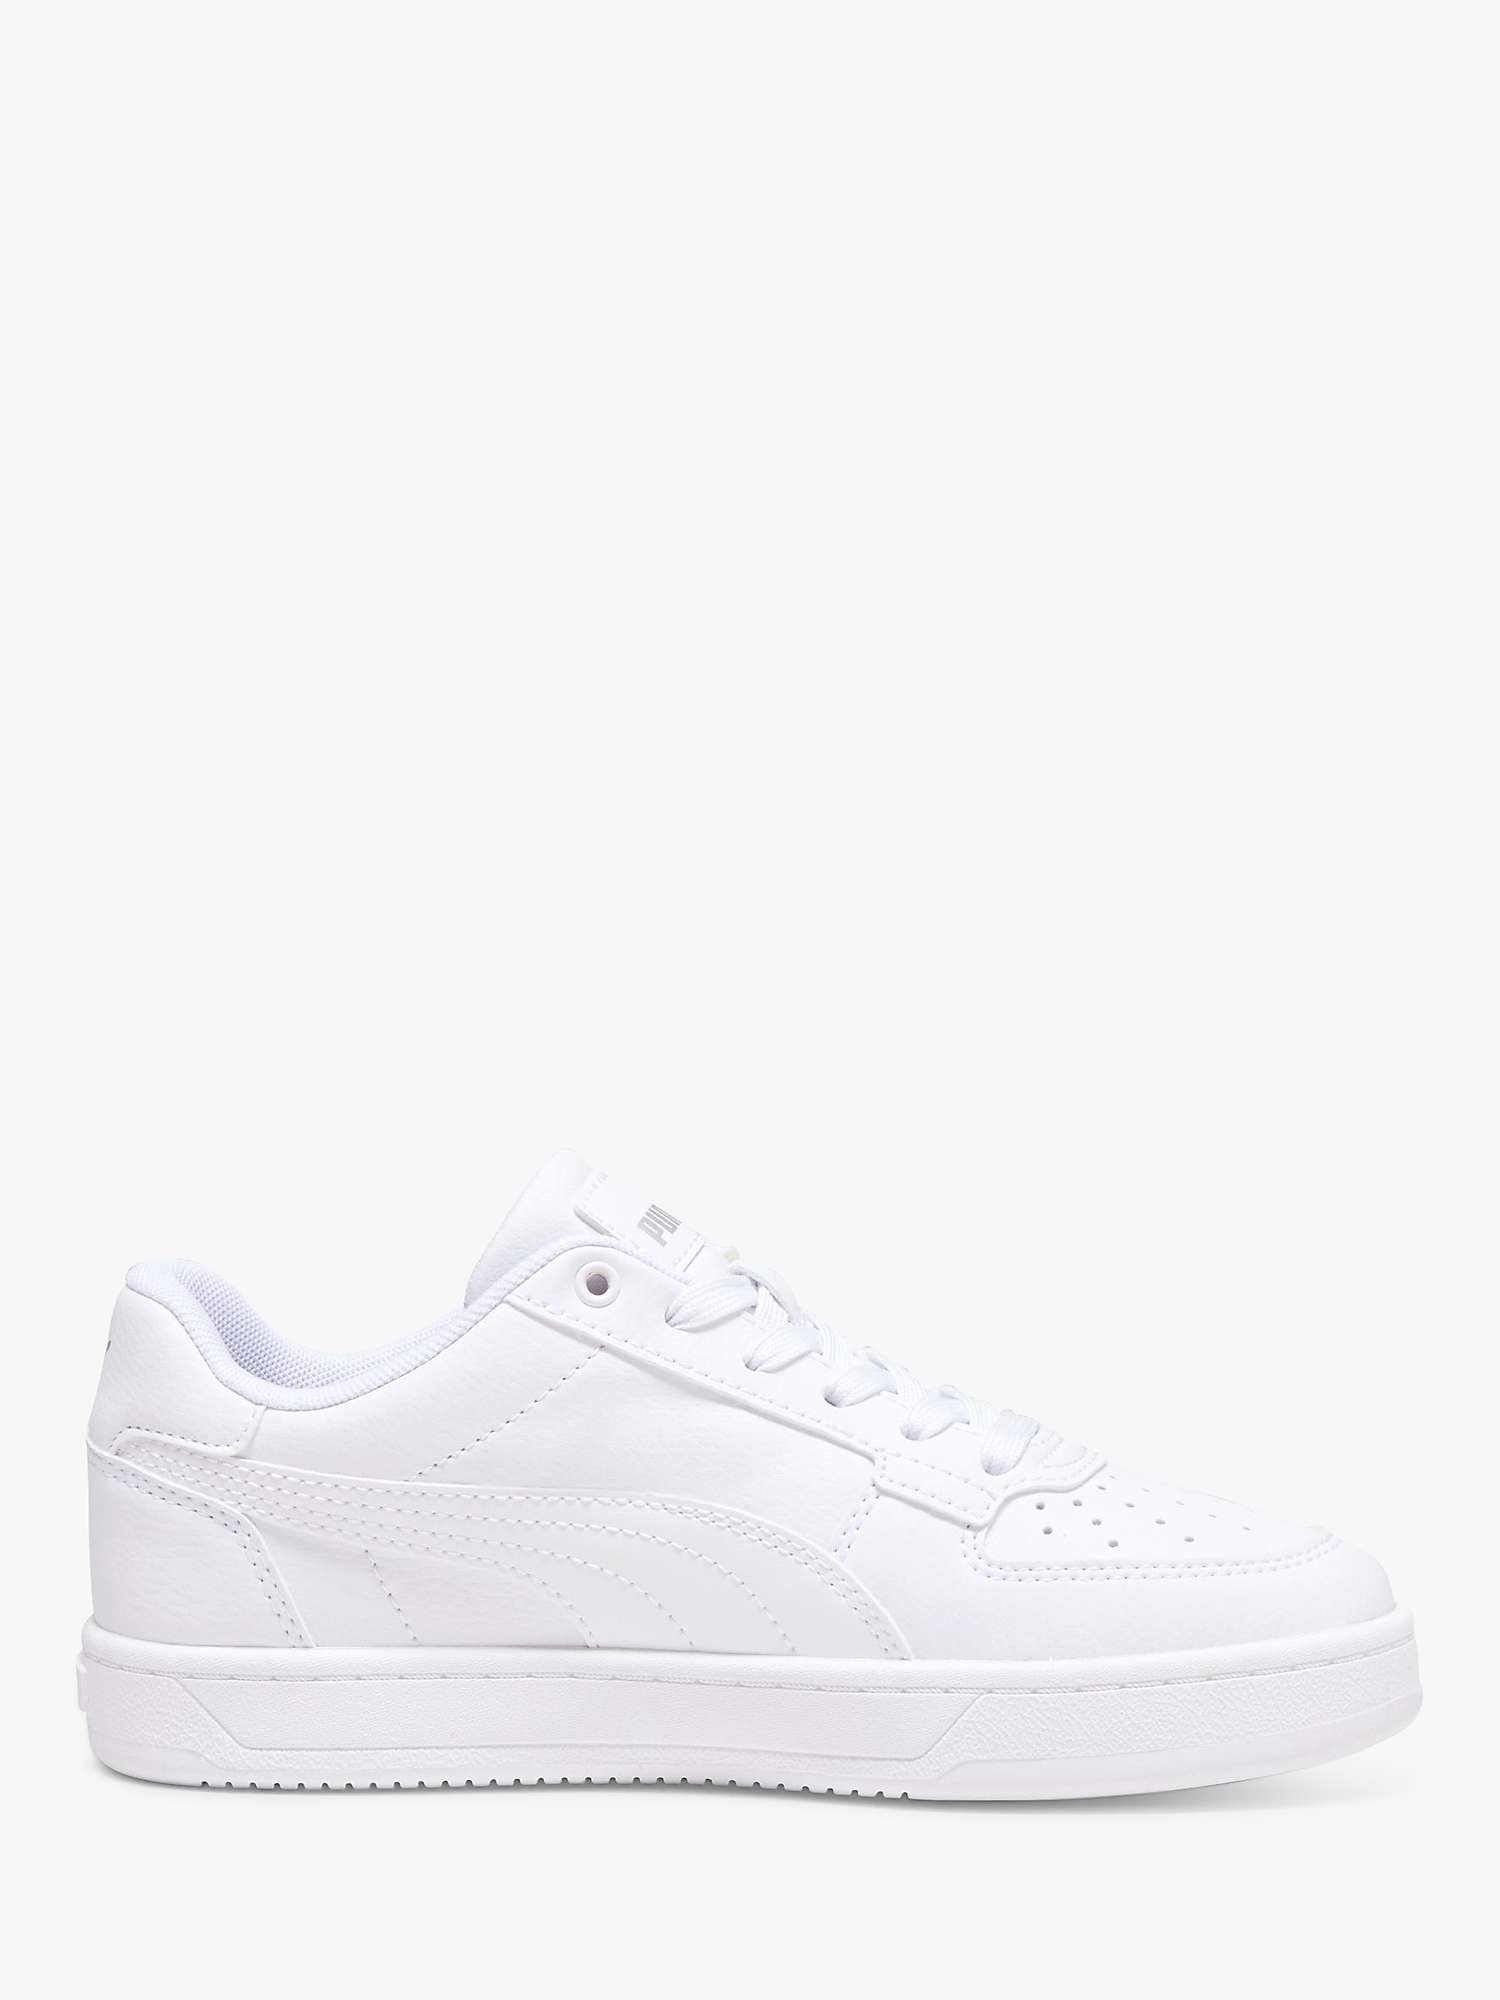 Buy PUMA Kids' Caven 2.0 Lace Up Trainers, White Online at johnlewis.com